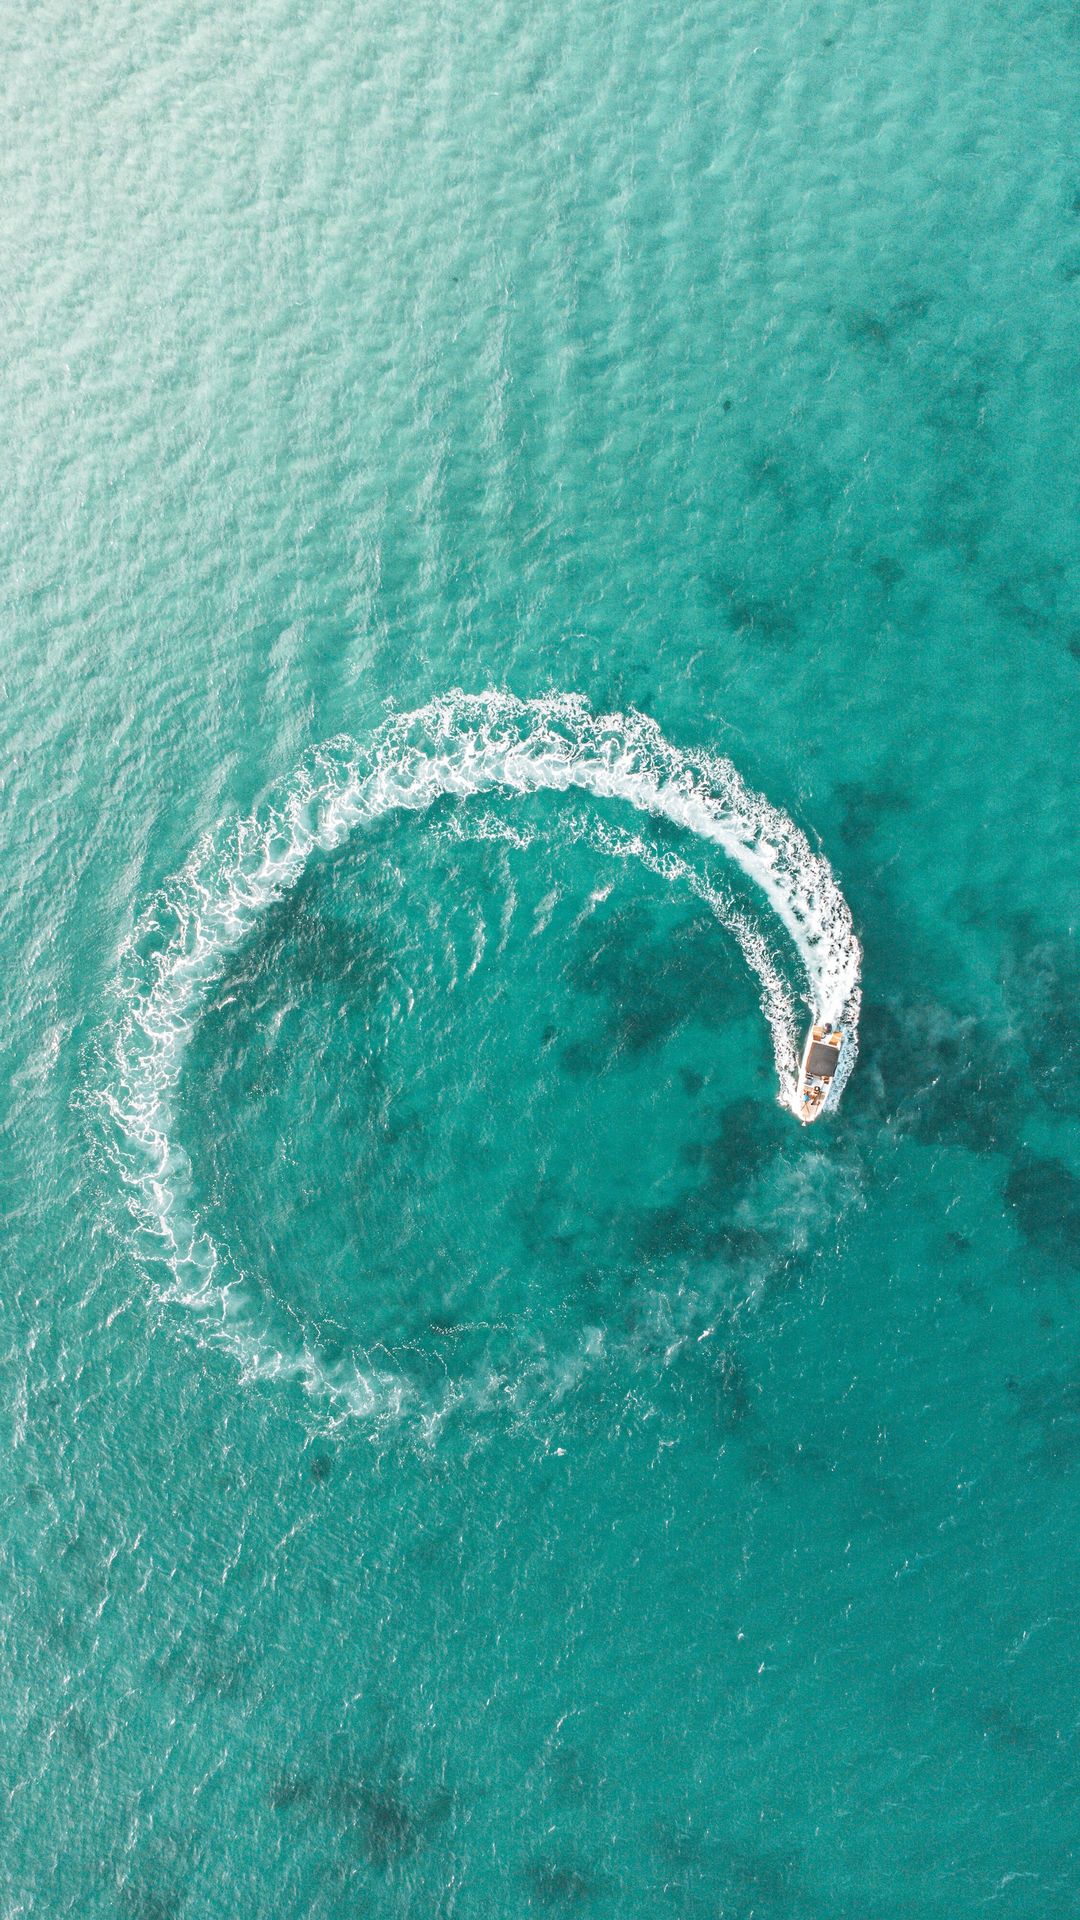 a whale in the water